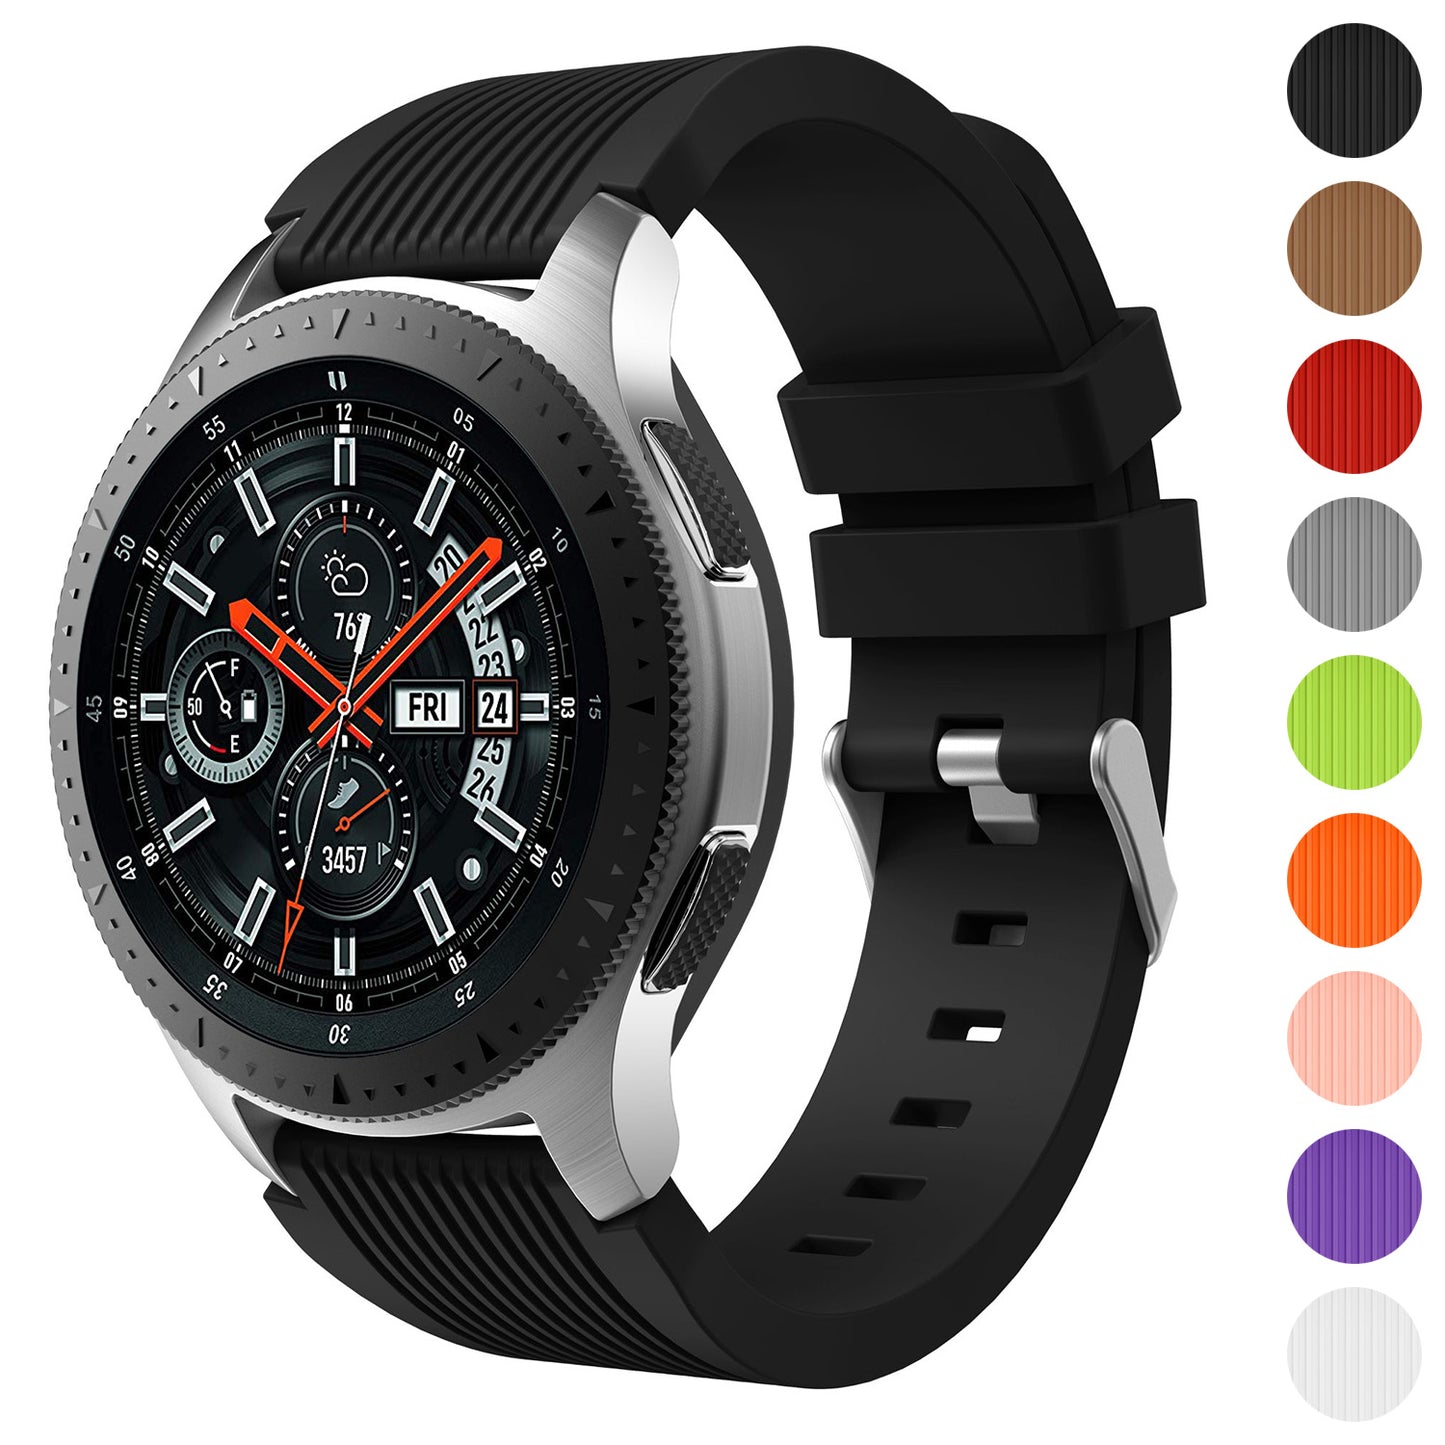 Rubber Strap for Samsung Galaxy Watch 42mm / Galaxy Watch Active / Gear S2 Classic